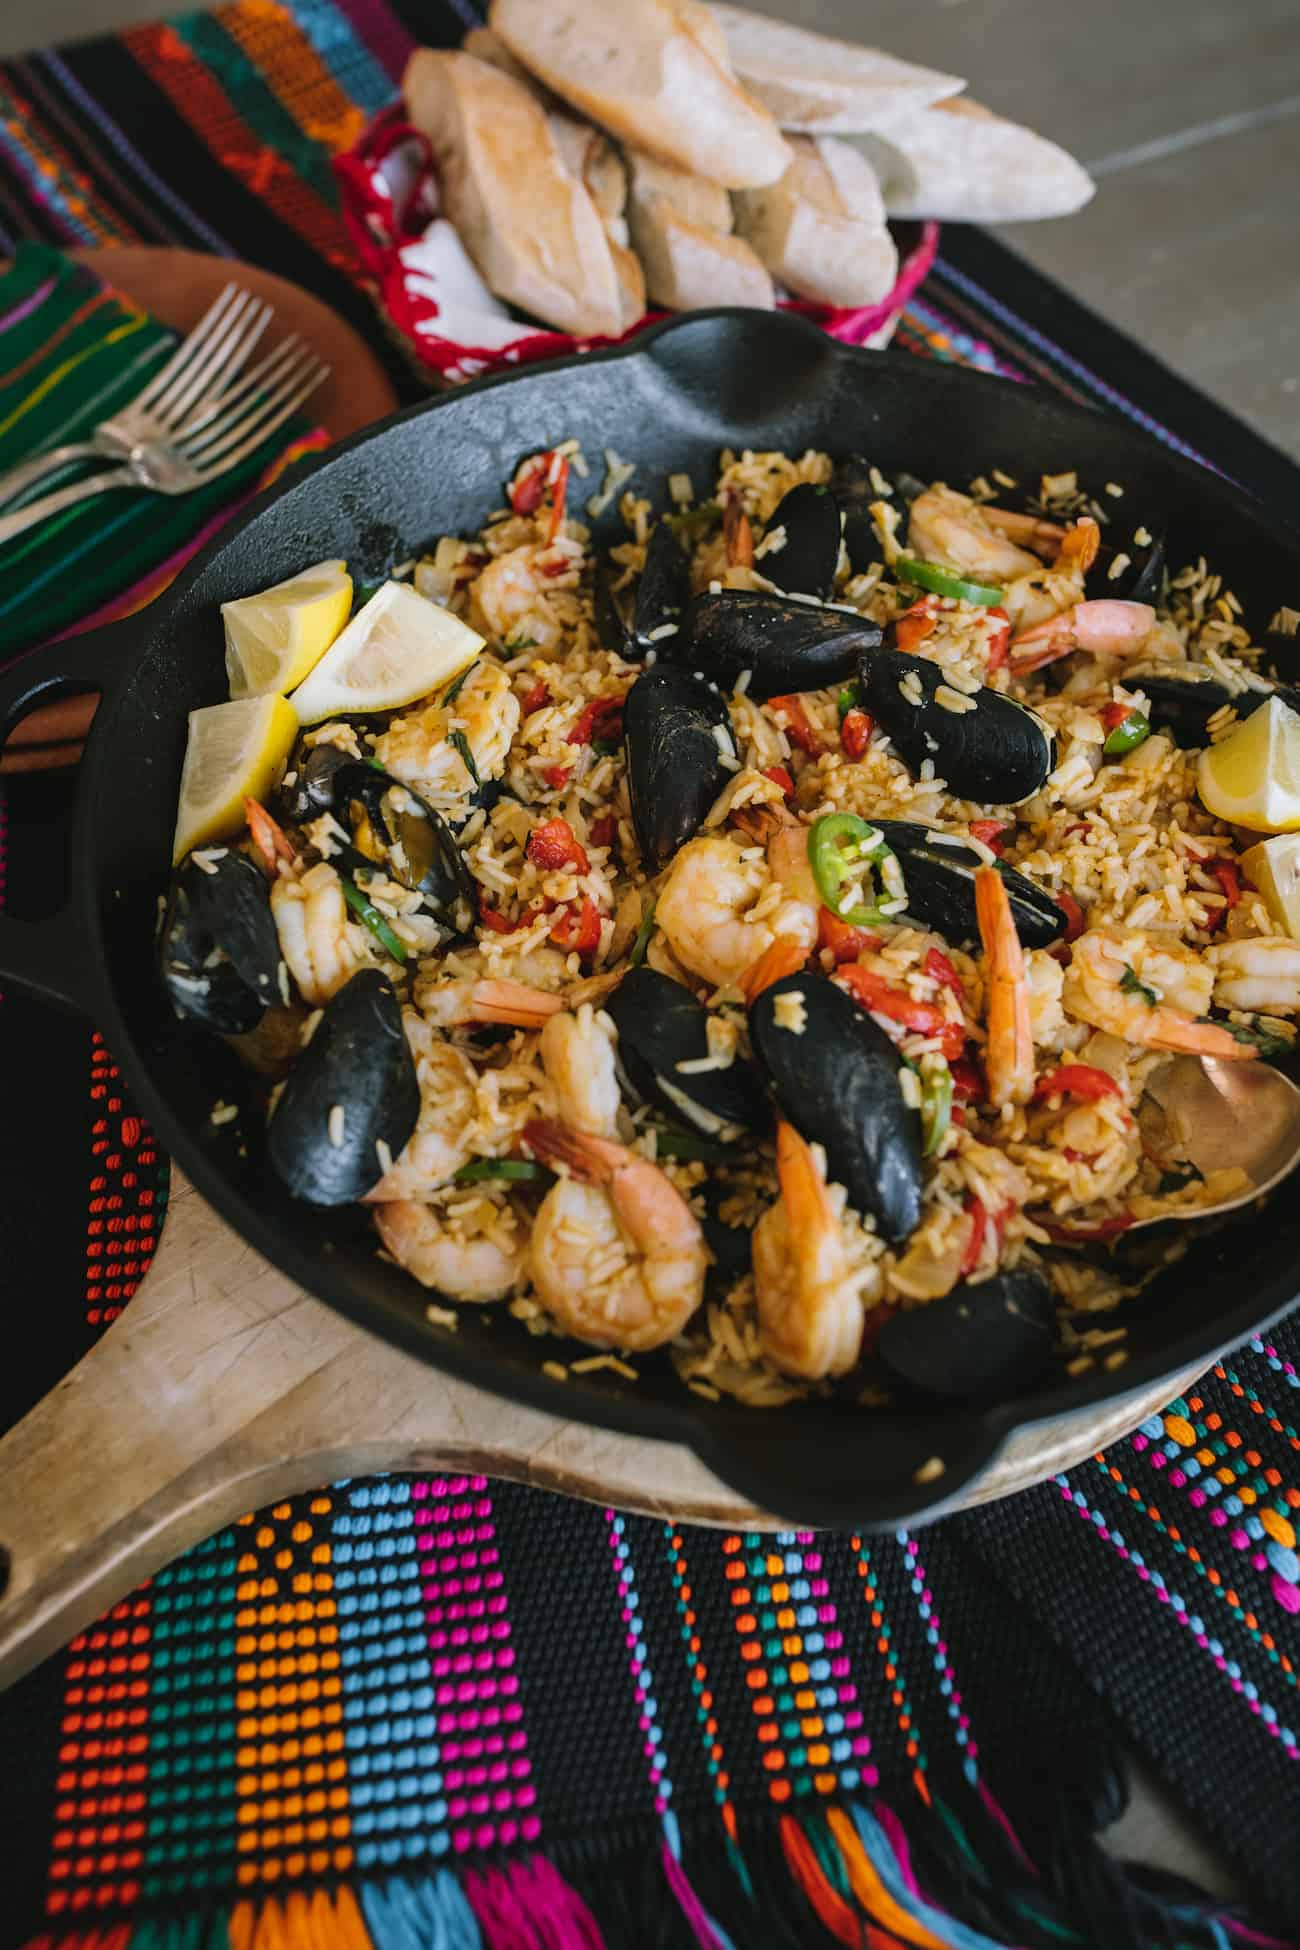 Cast iron skillet filled with easy seafood paella made with shrimp and mussels.